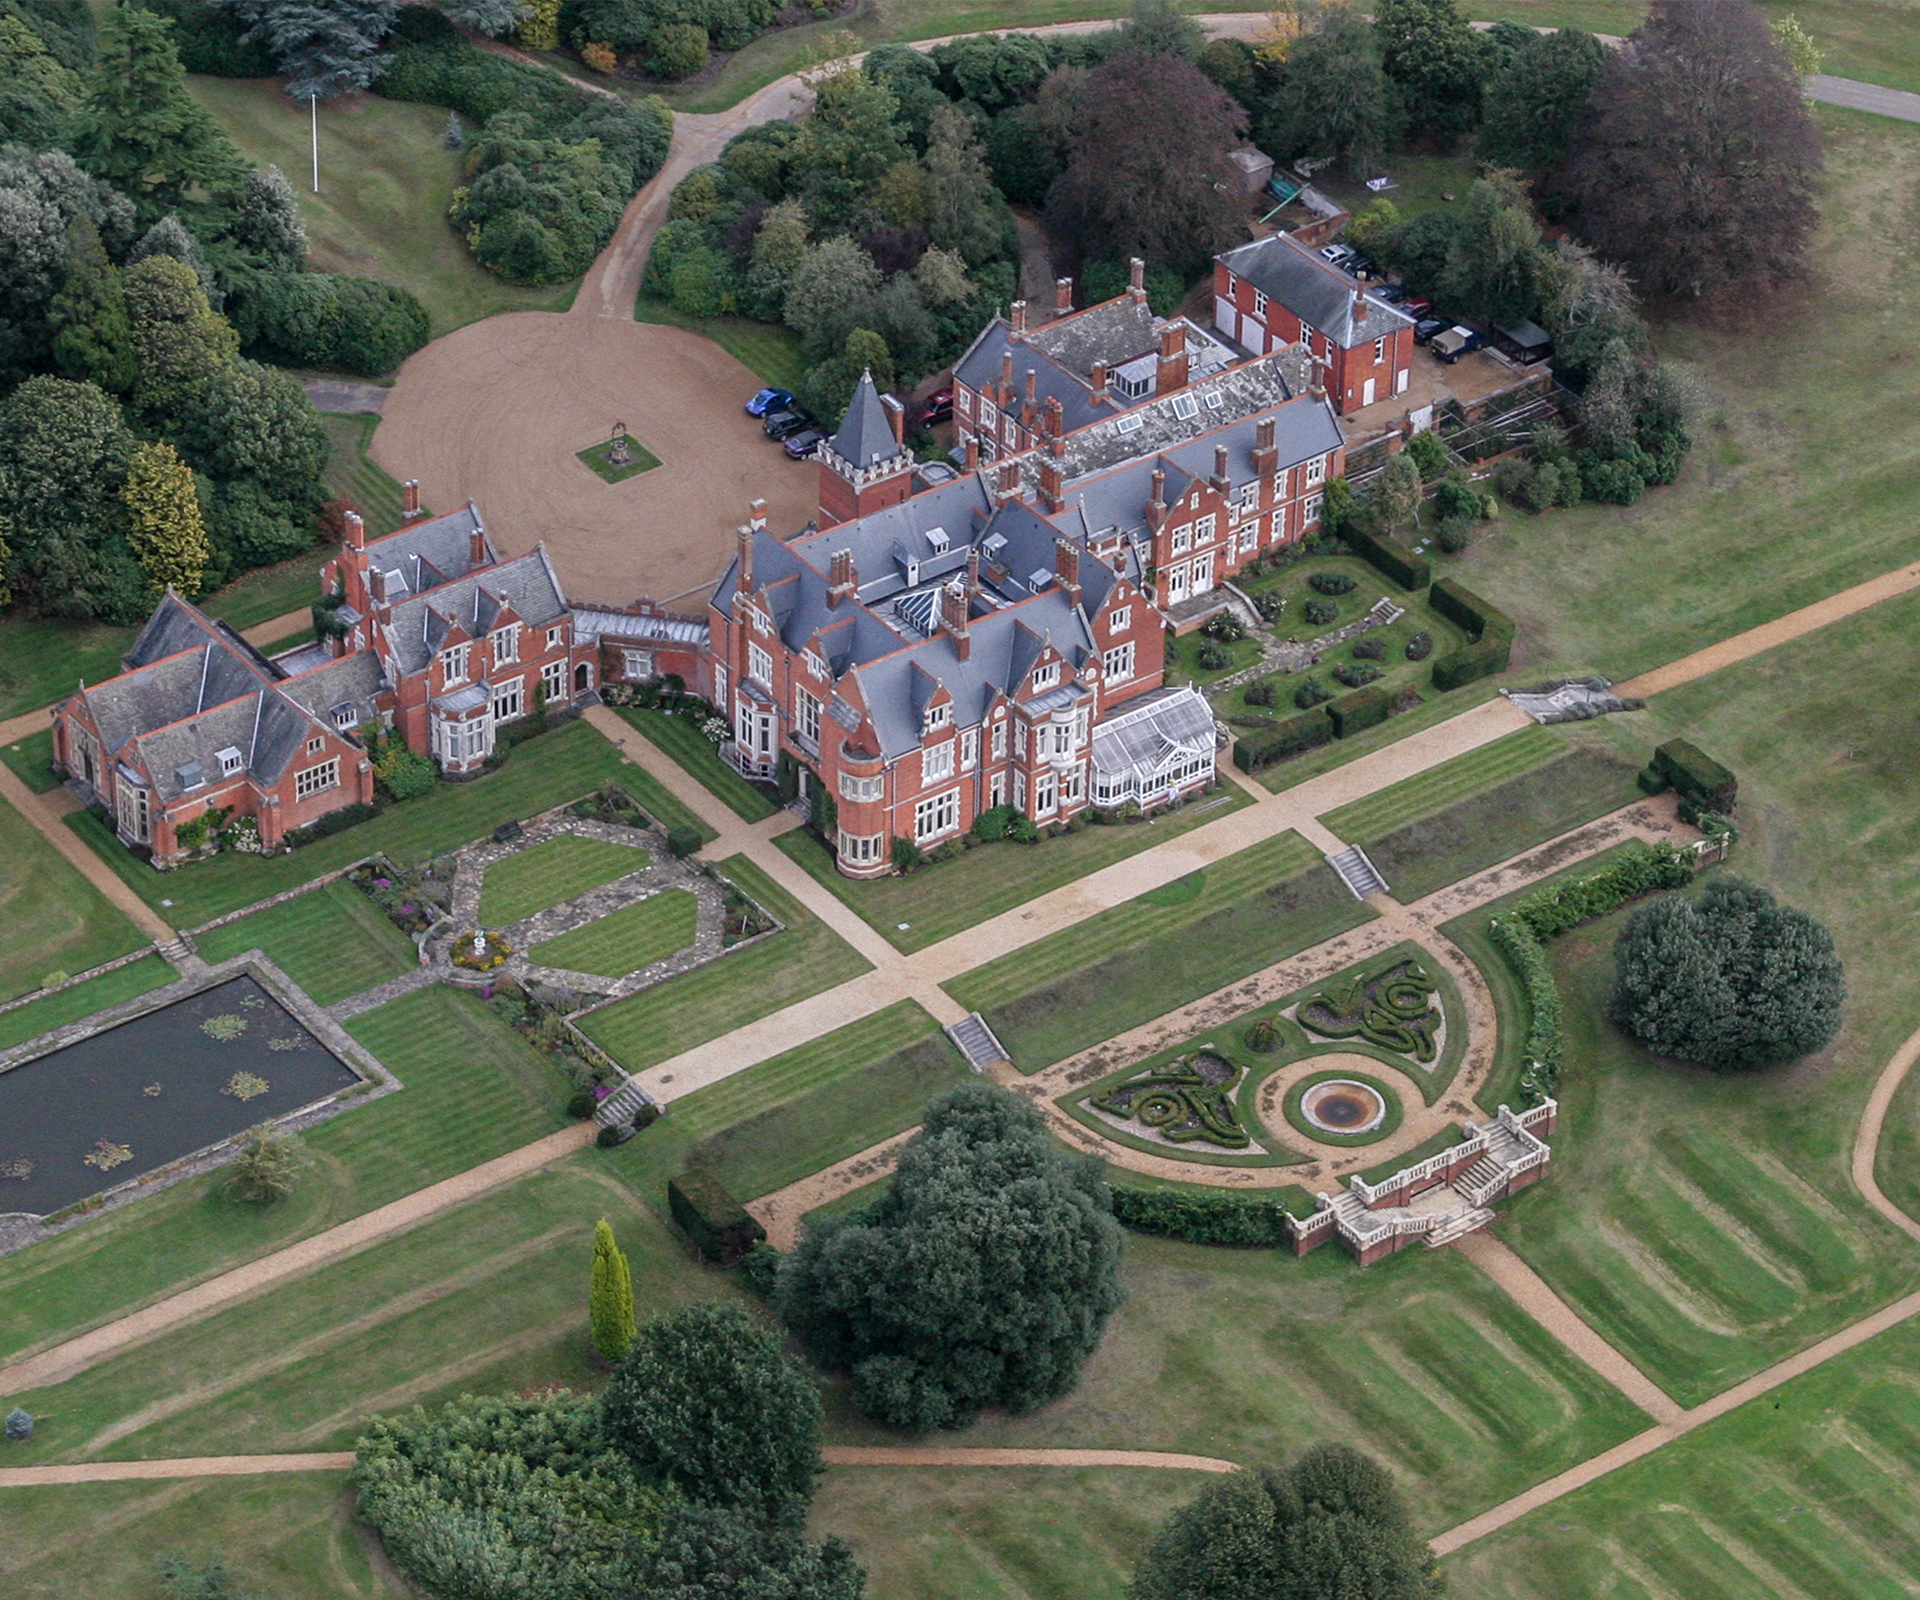 Bagshot Park, homes owned by the British royal family